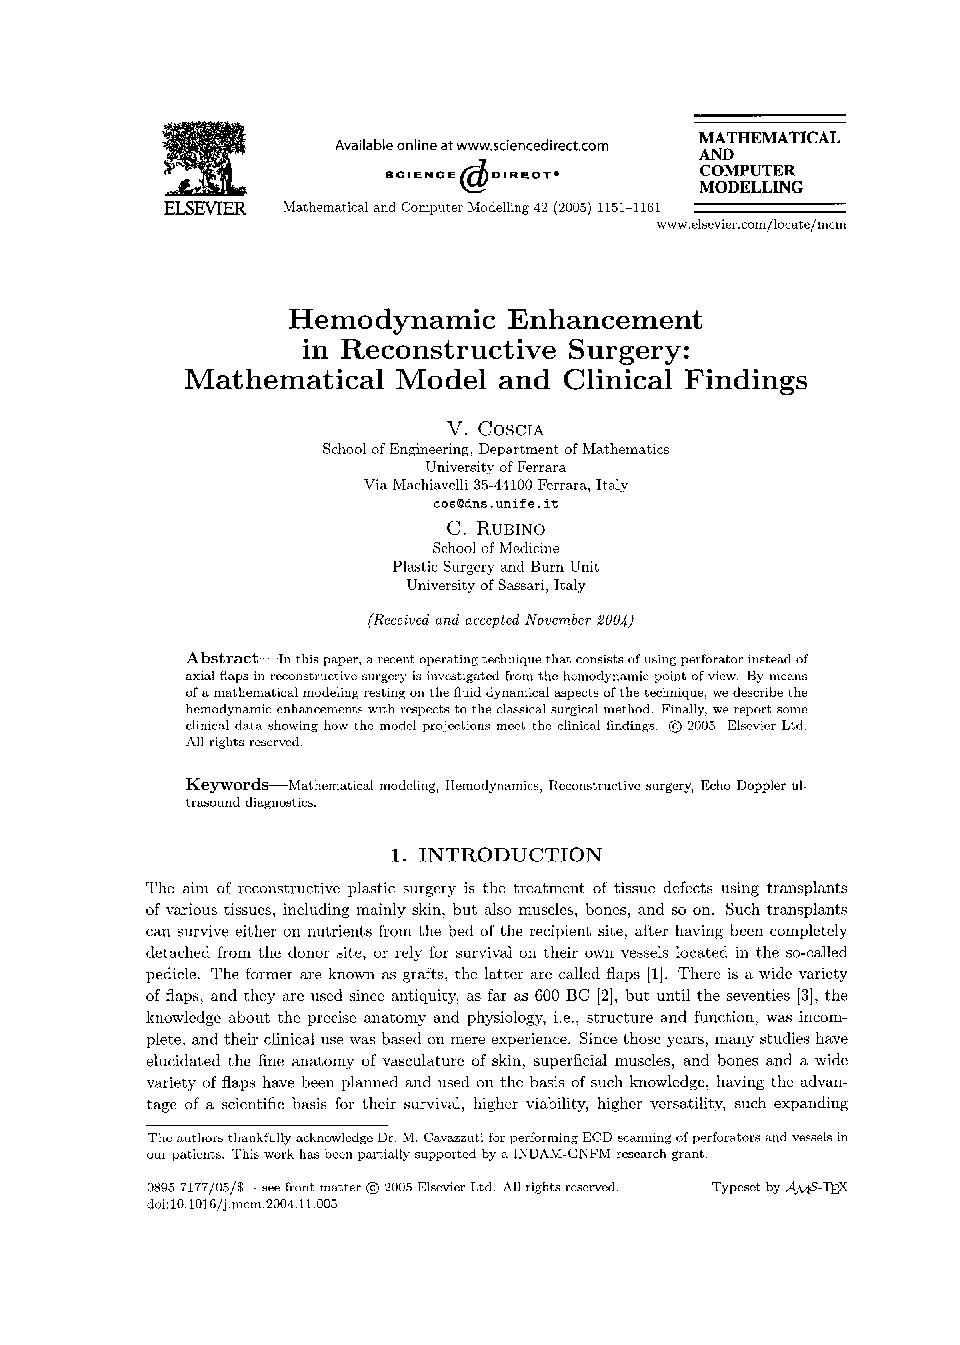 Hemodynamic enhancement in reconstructive surgery: Mathematical model and clinical findings